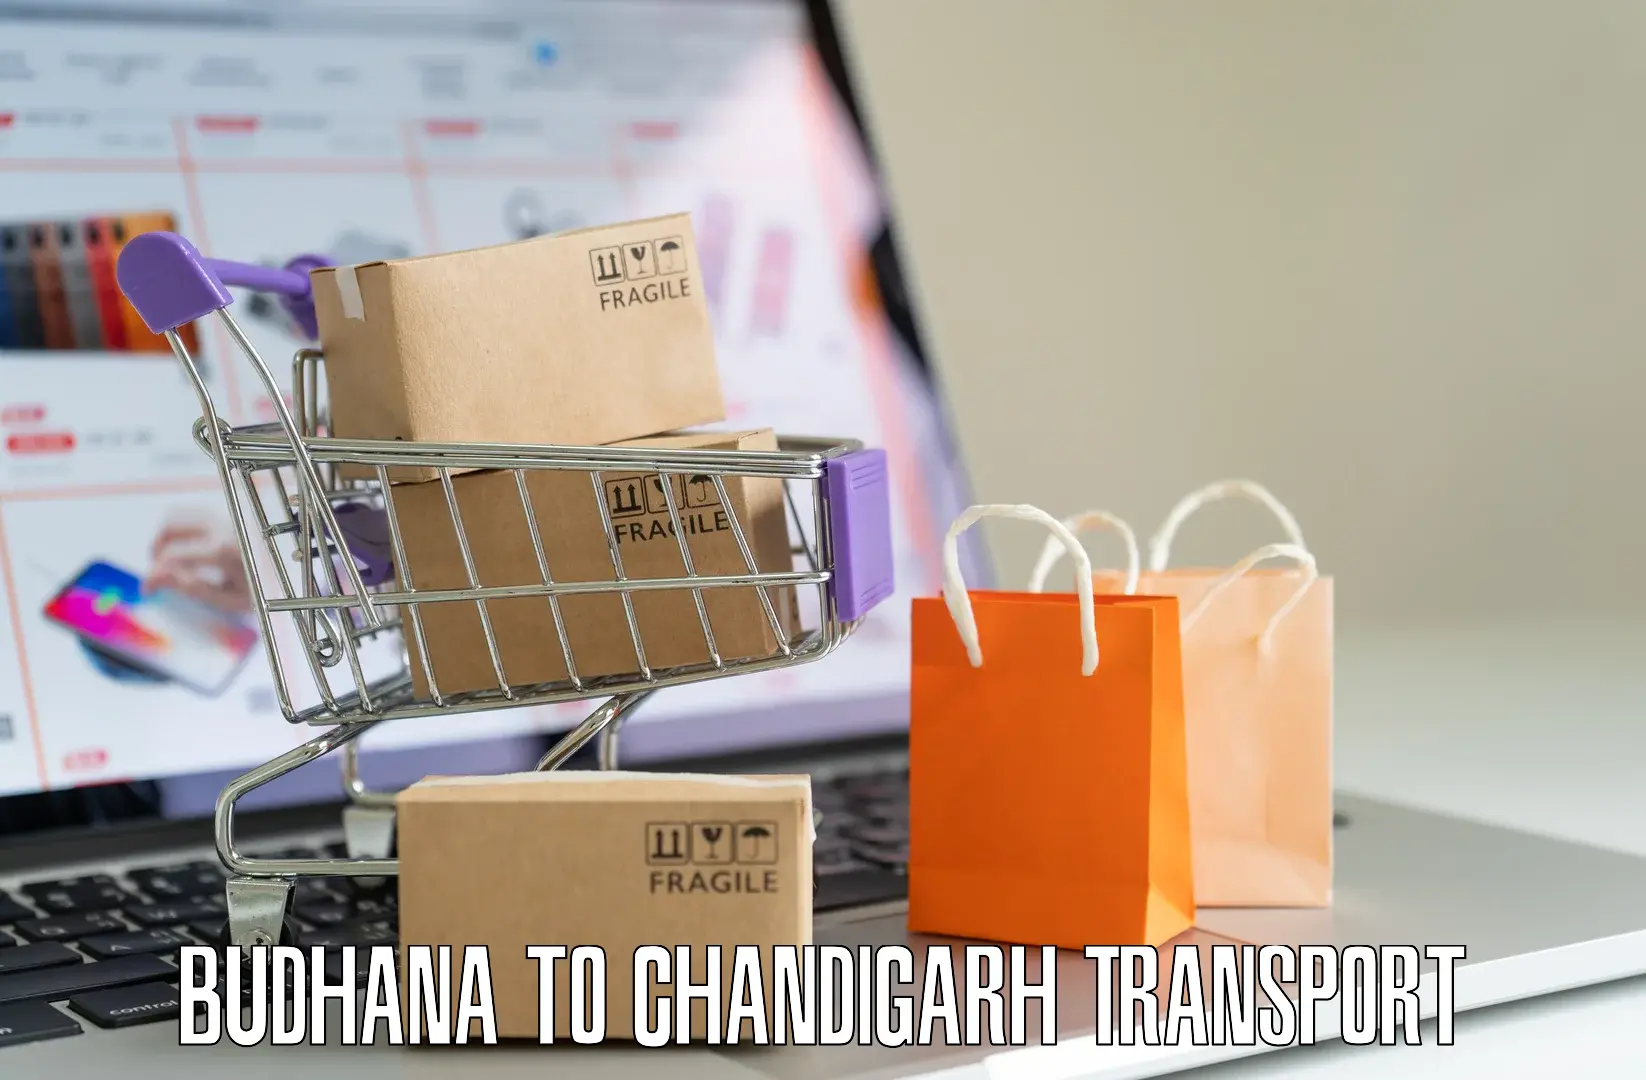 Commercial transport service Budhana to Chandigarh